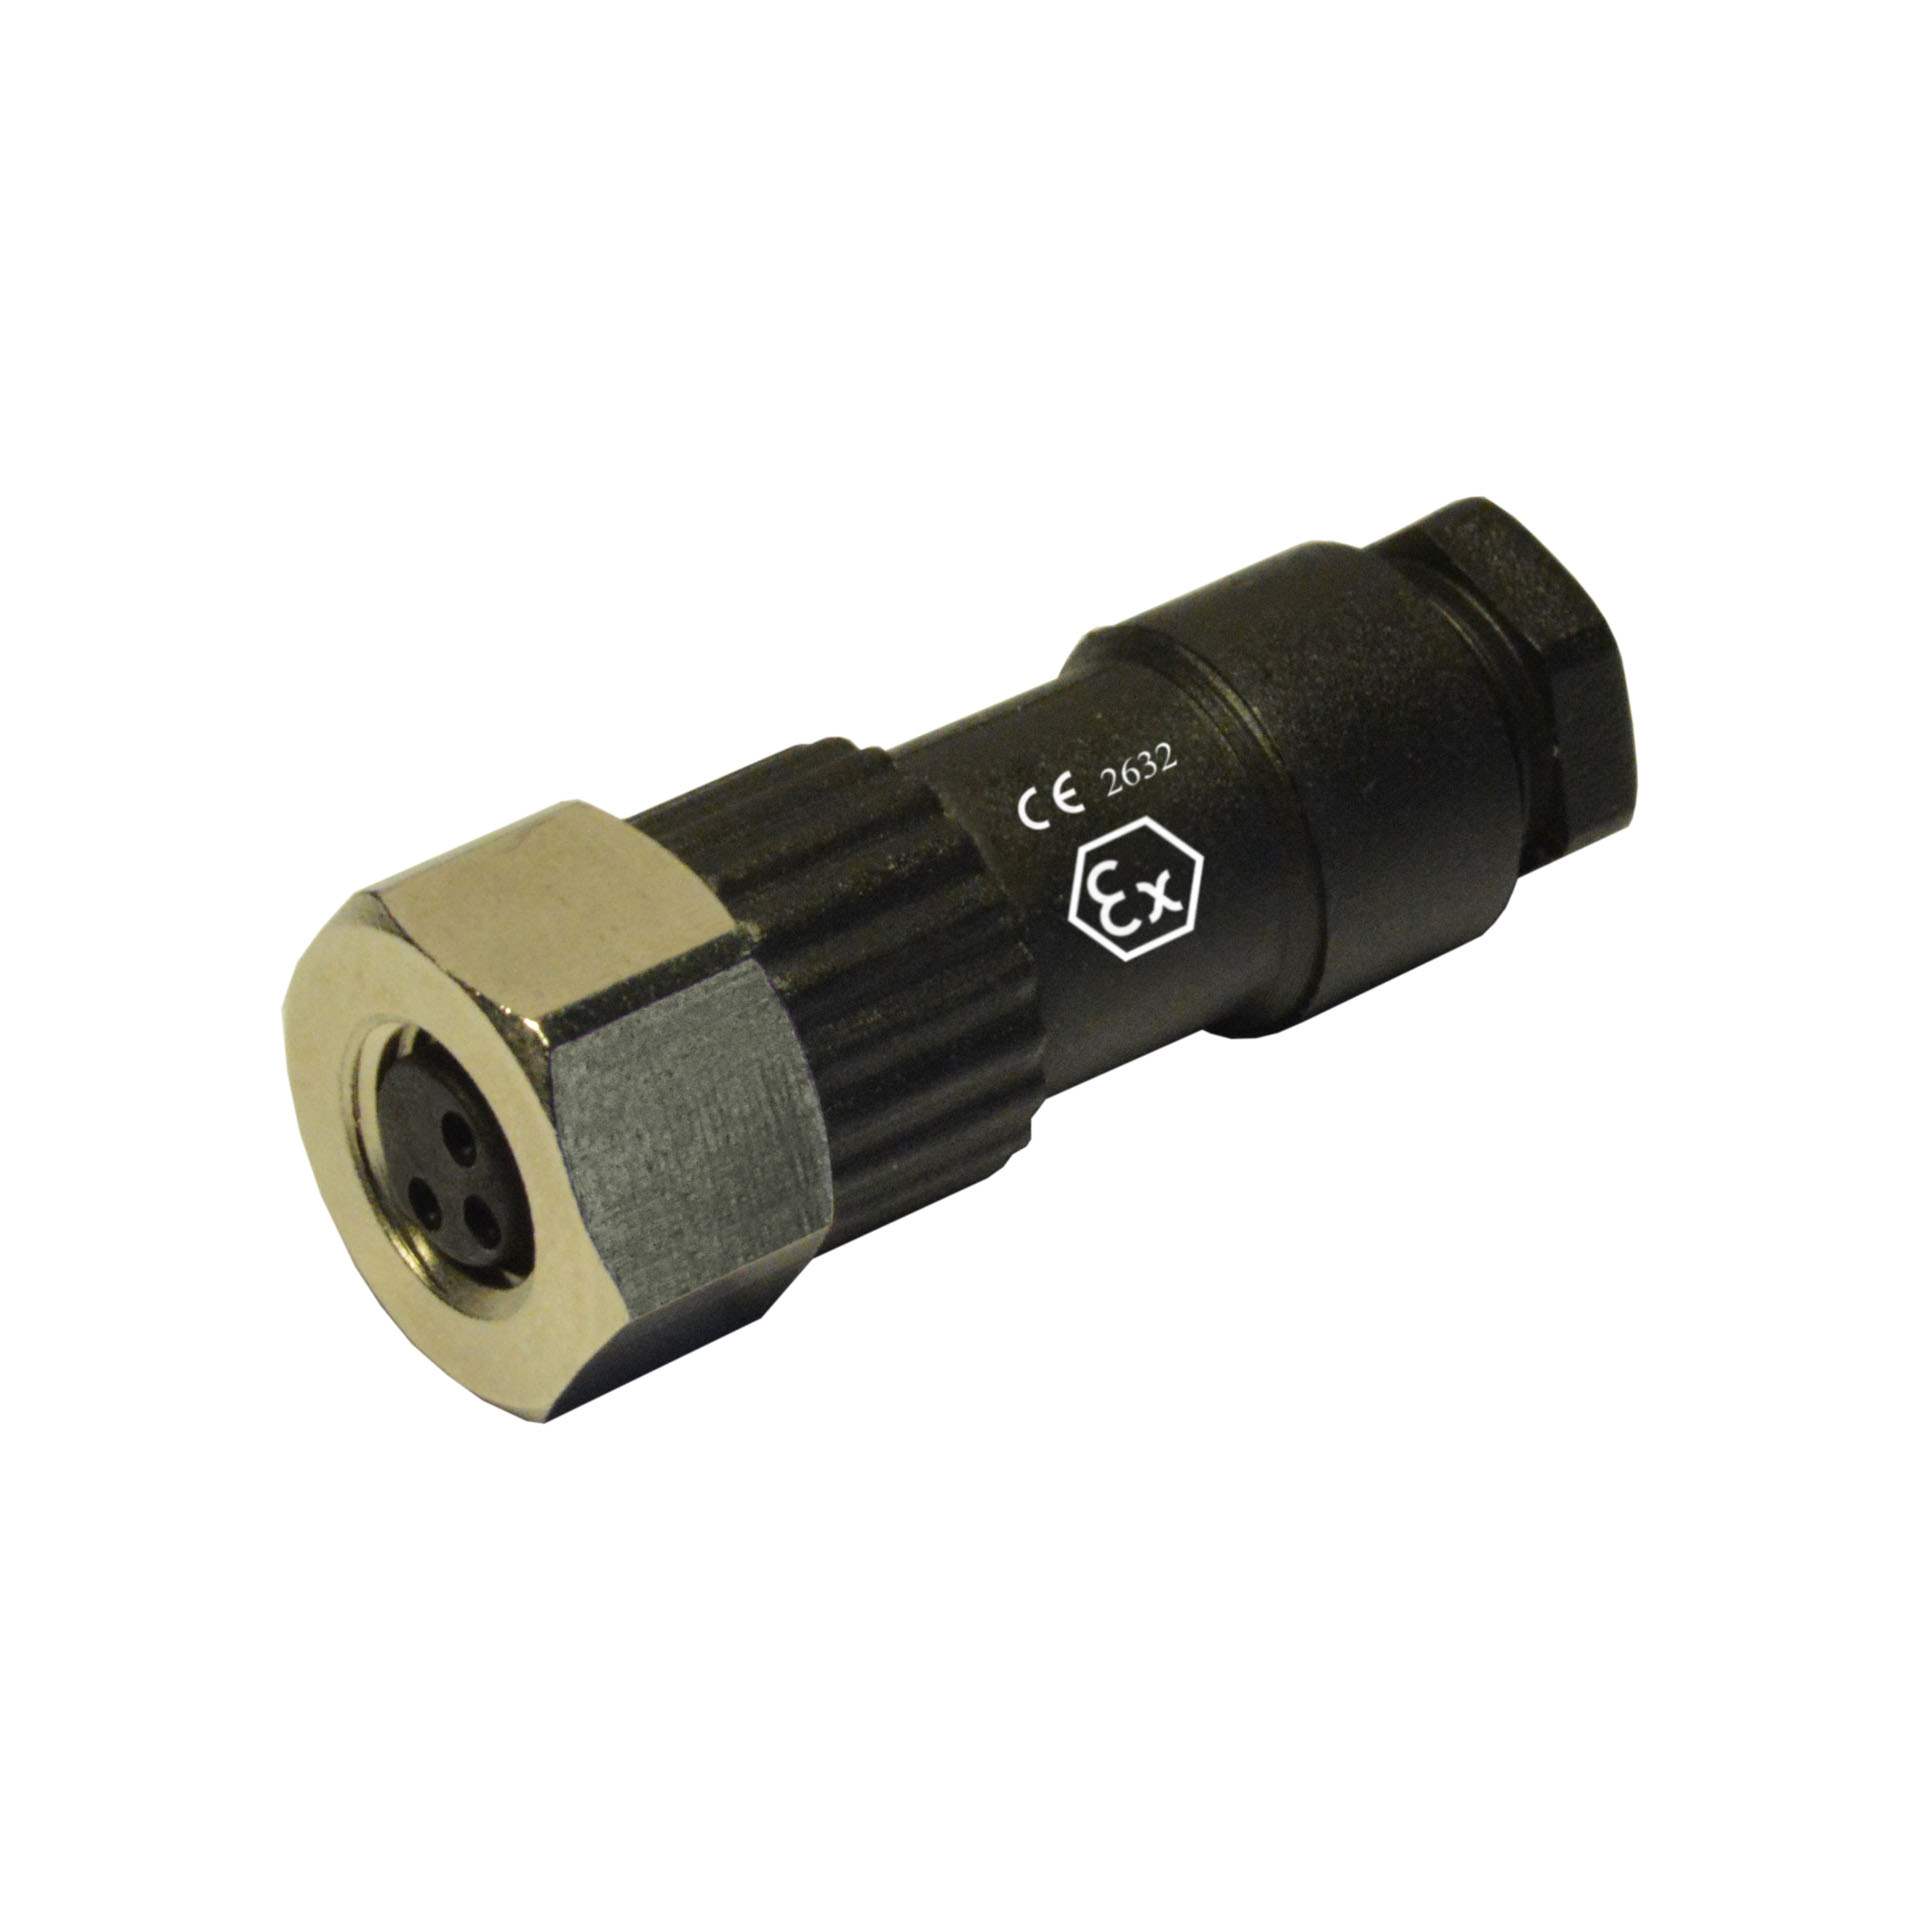 Elevate Your Industrial Connectivity with HTP's M8 Circular Valve Connectors